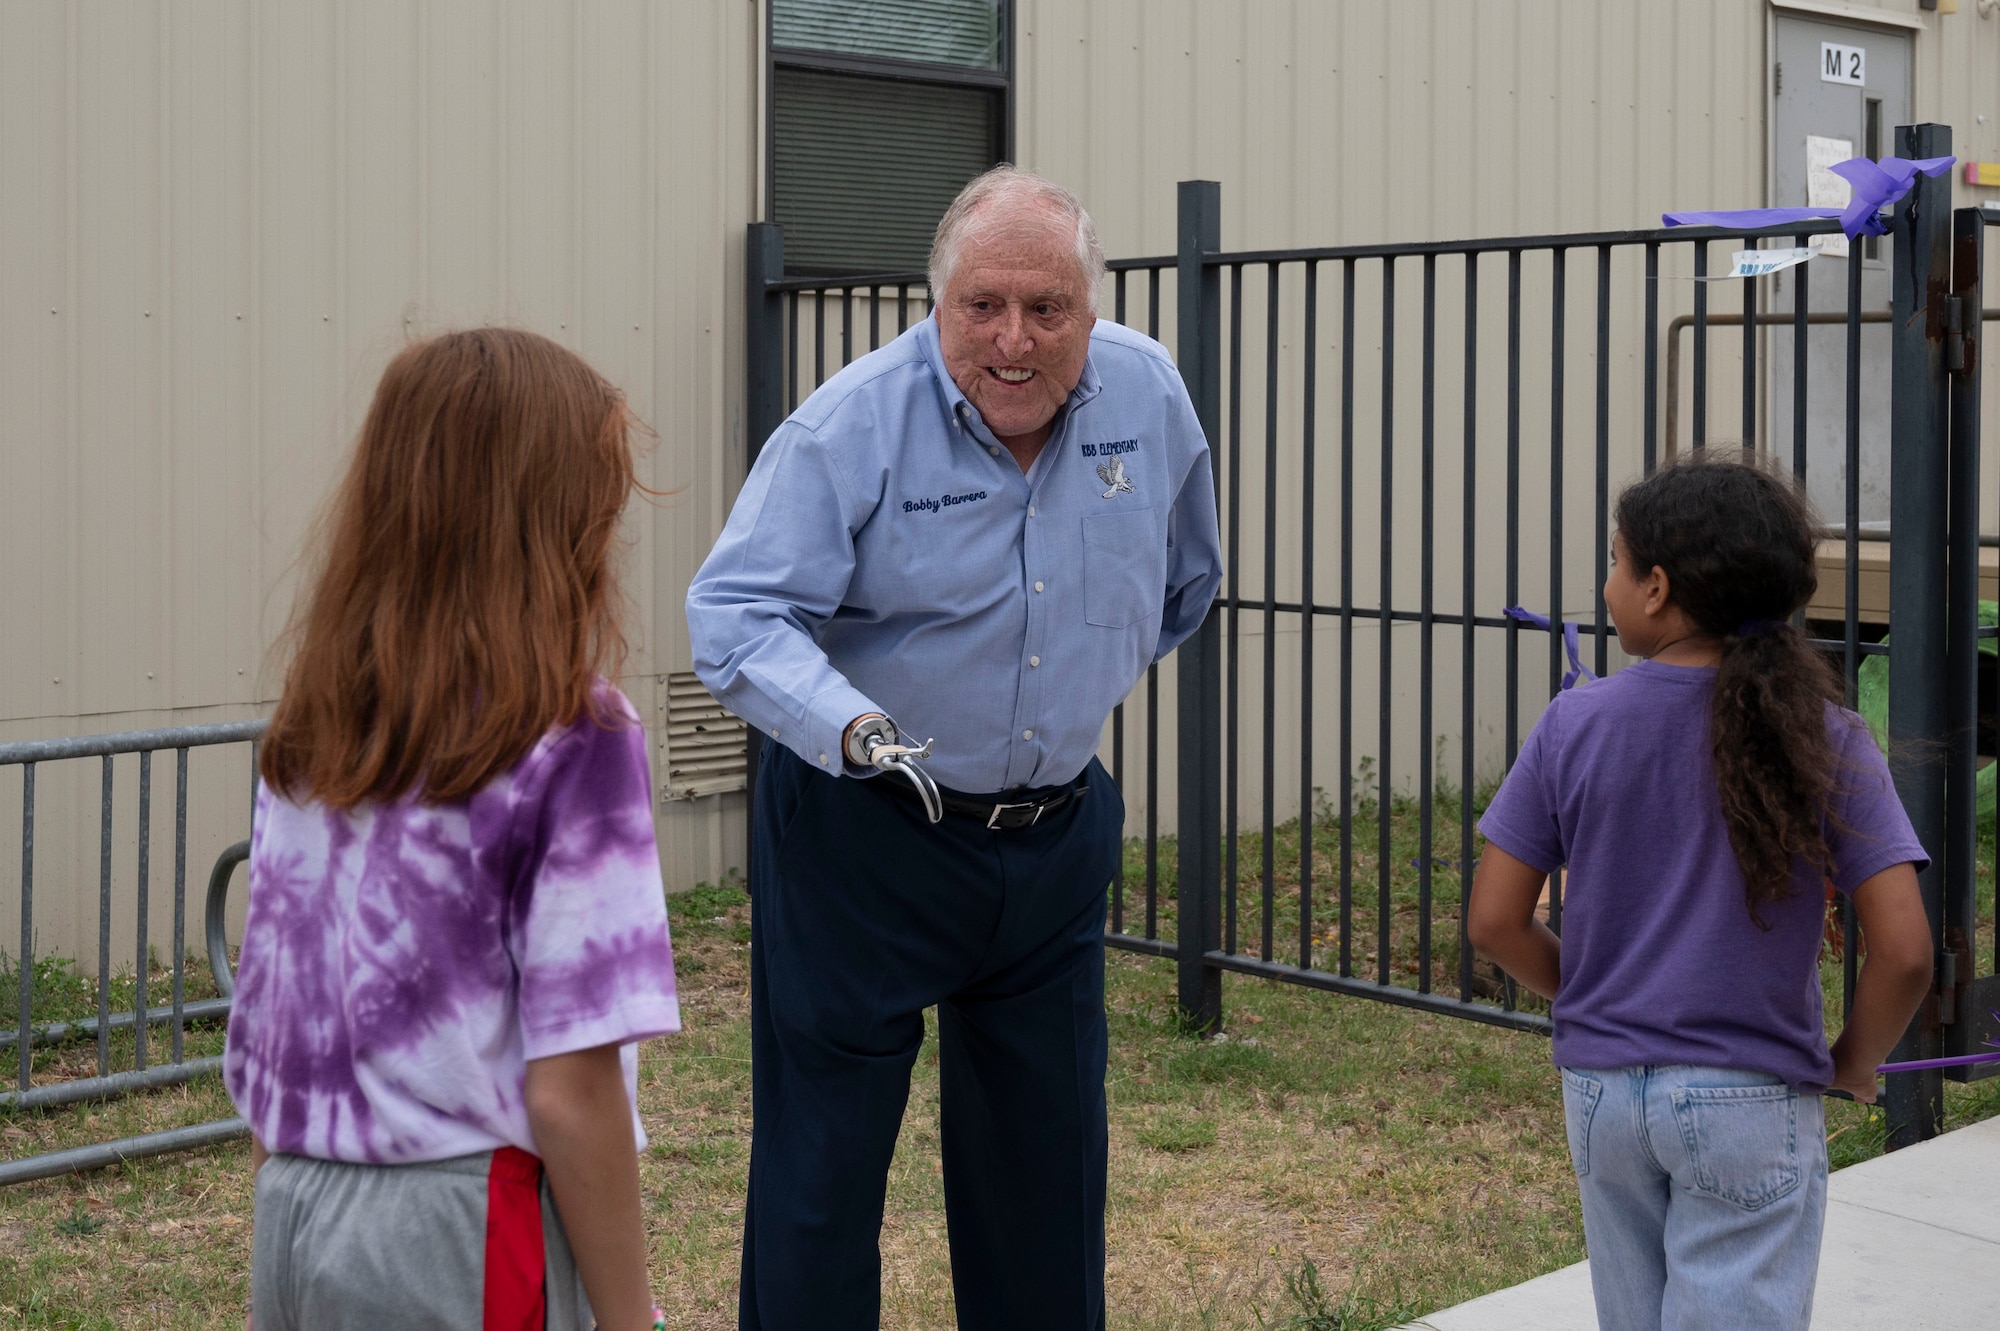 Roberto Barrera, U.S. Marine Corp. veteran and former educator, whom the school was named after, greets students entering the grounds of the Roberto “Bobby” Barrera (RBB) Elementary School during a “Purple Up Parade” event held at Laughlin Air Force Base, Texas, April 17, 2024. This parade celebrated Purple Up Day and Month of the Military Child, a time devoted to showing support and appreciation for military children. (U.S. Air Force photo by Senior Airman Kailee Reynolds)